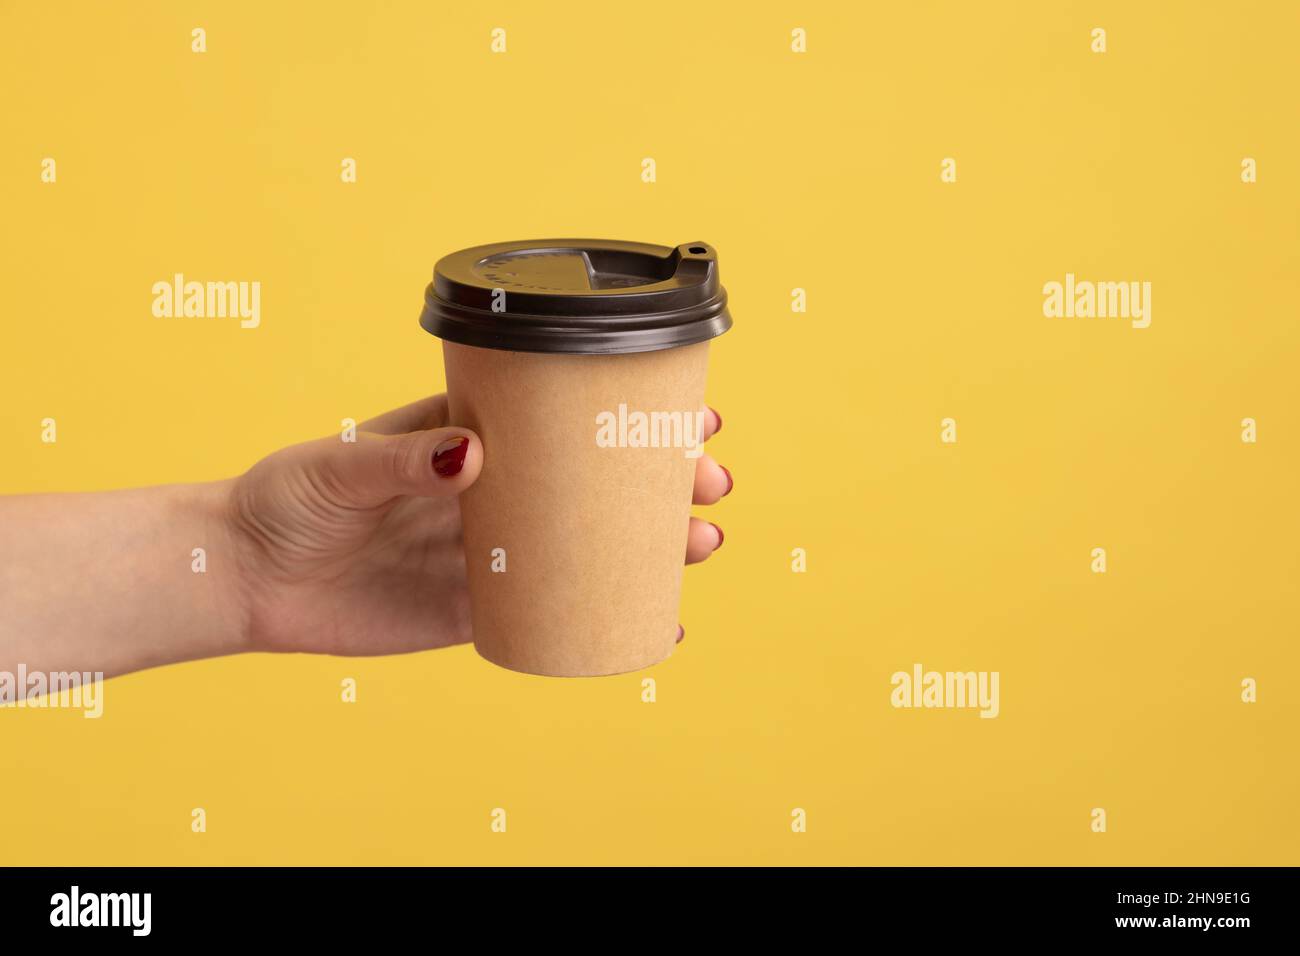 Closeup hand giving coffee in disposable cup, hot drink with caffeine to boost energy in morning, coffee break at work, tasty beverage and relaxation. Indoor studio shot isolated on yellow background. Stock Photo